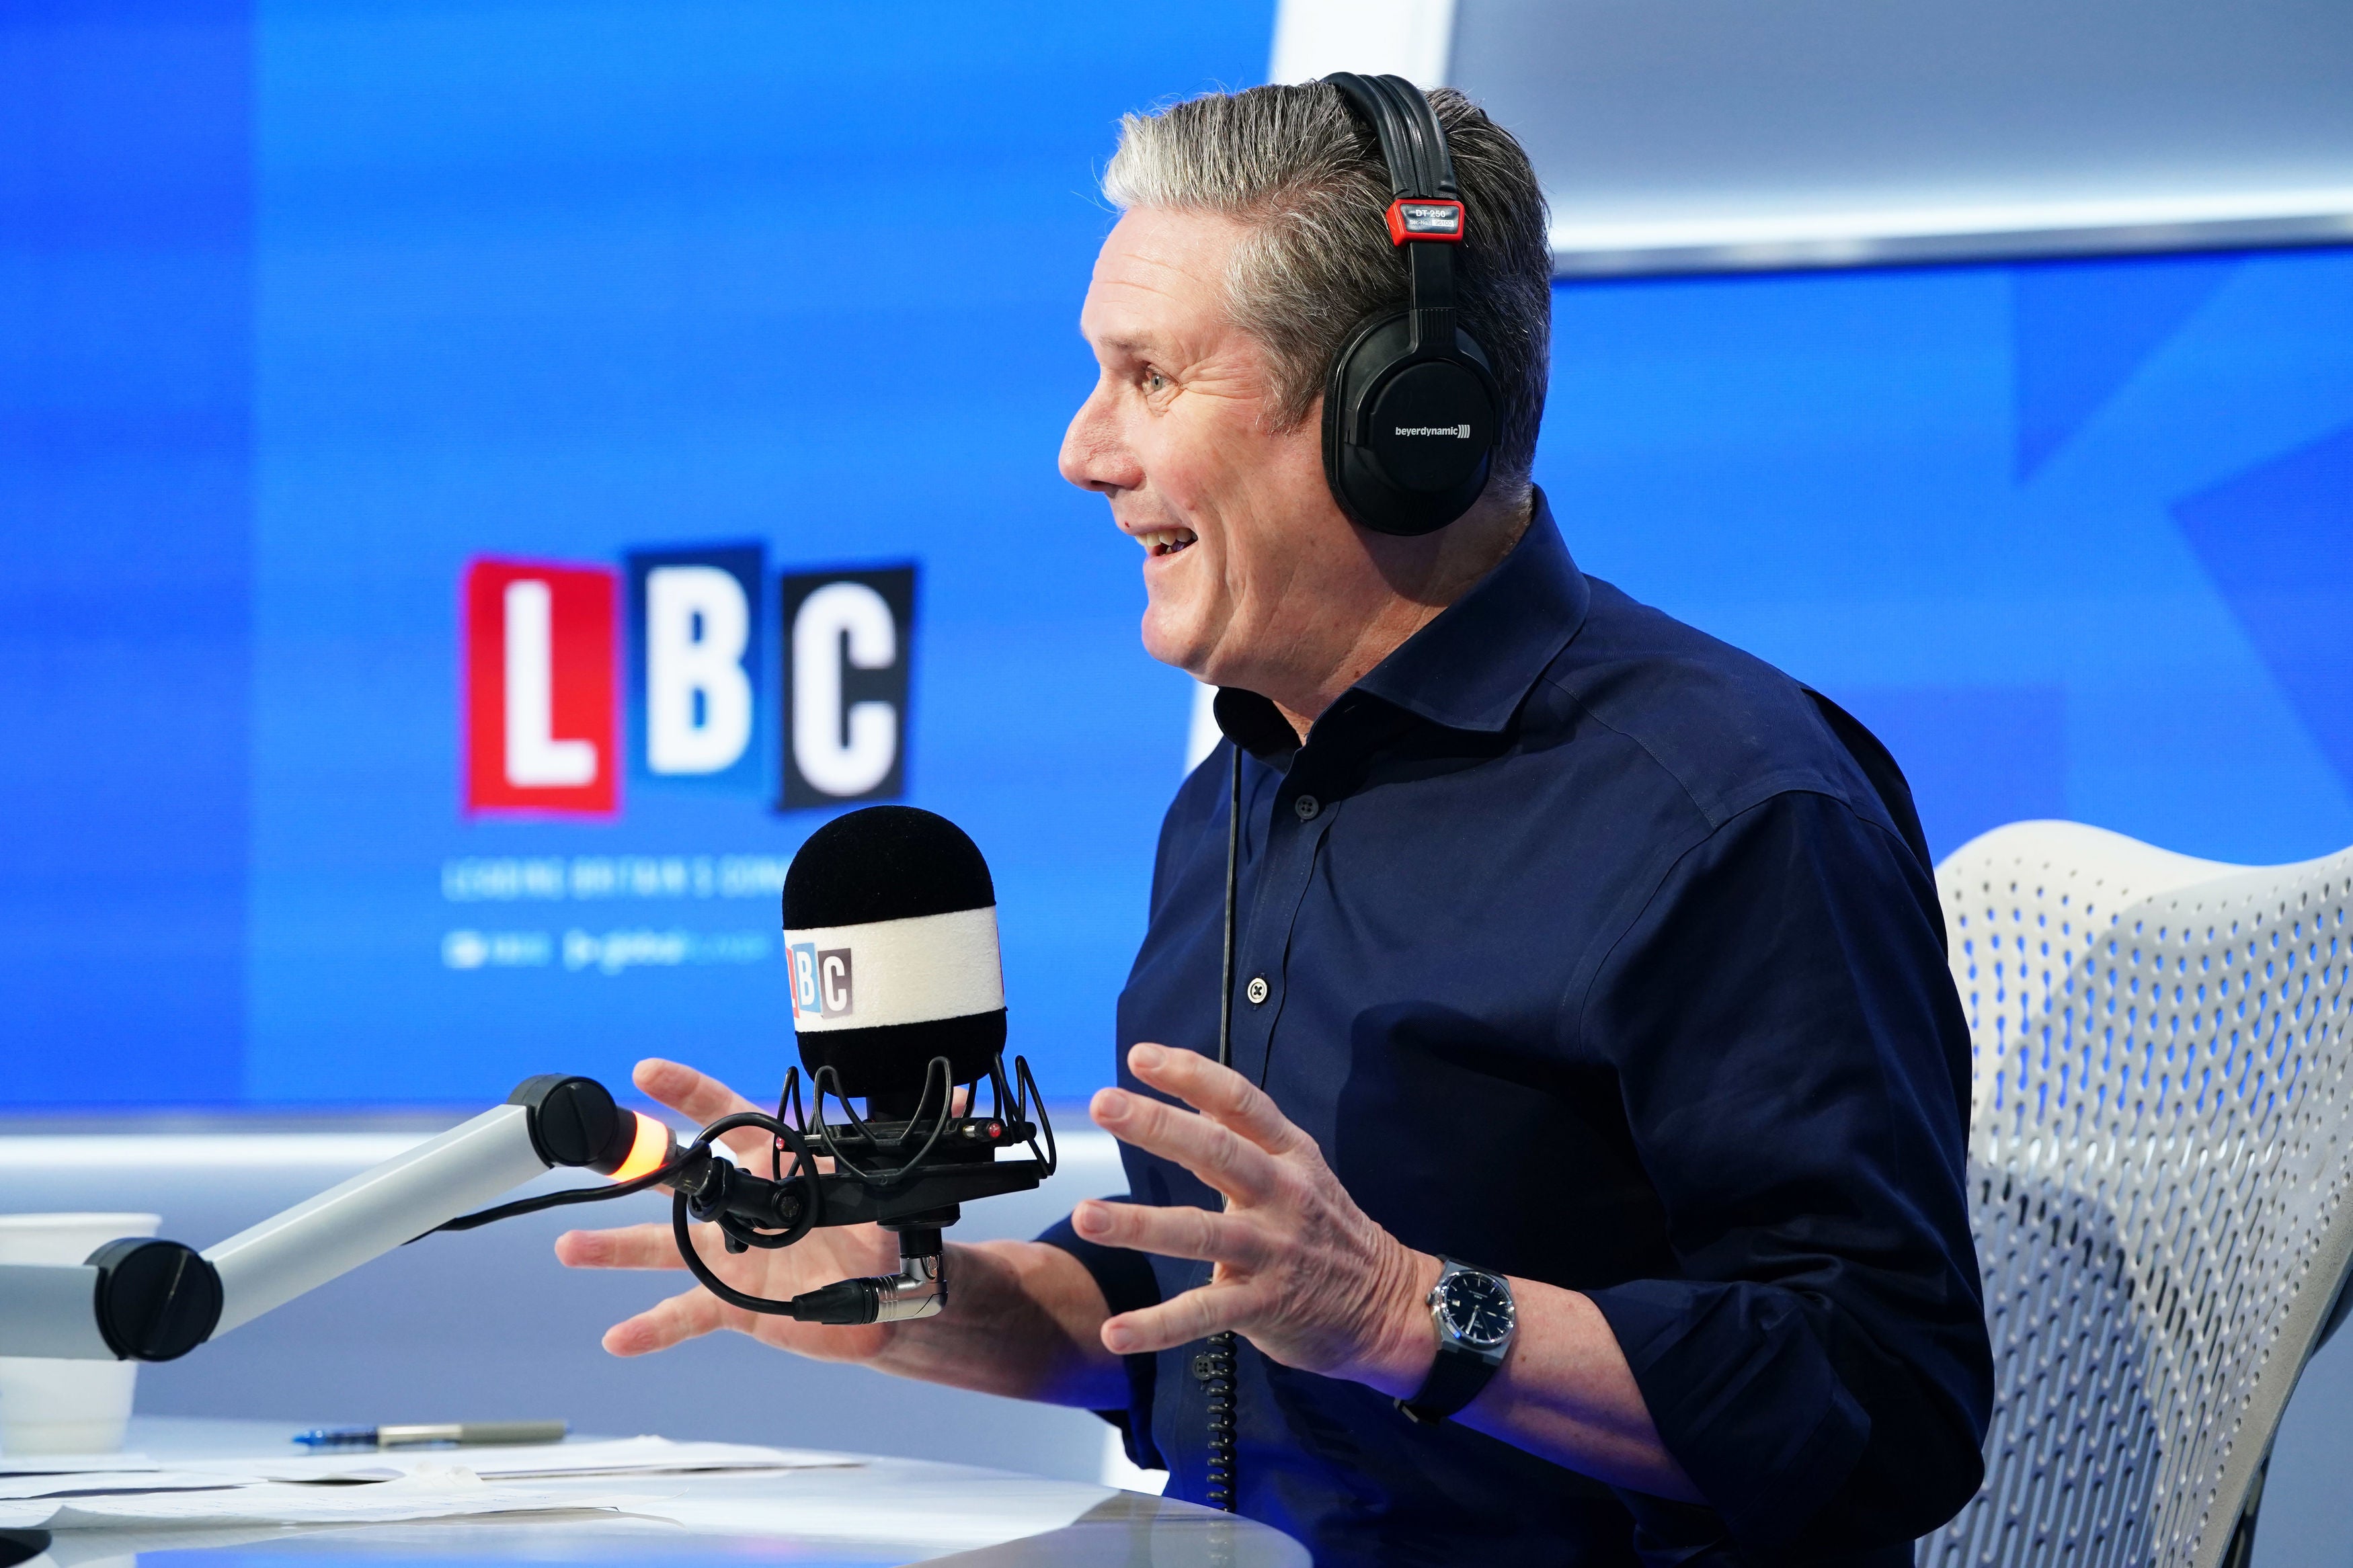 Keir Starmer says he wants to get tax burden down on LBC phone-in